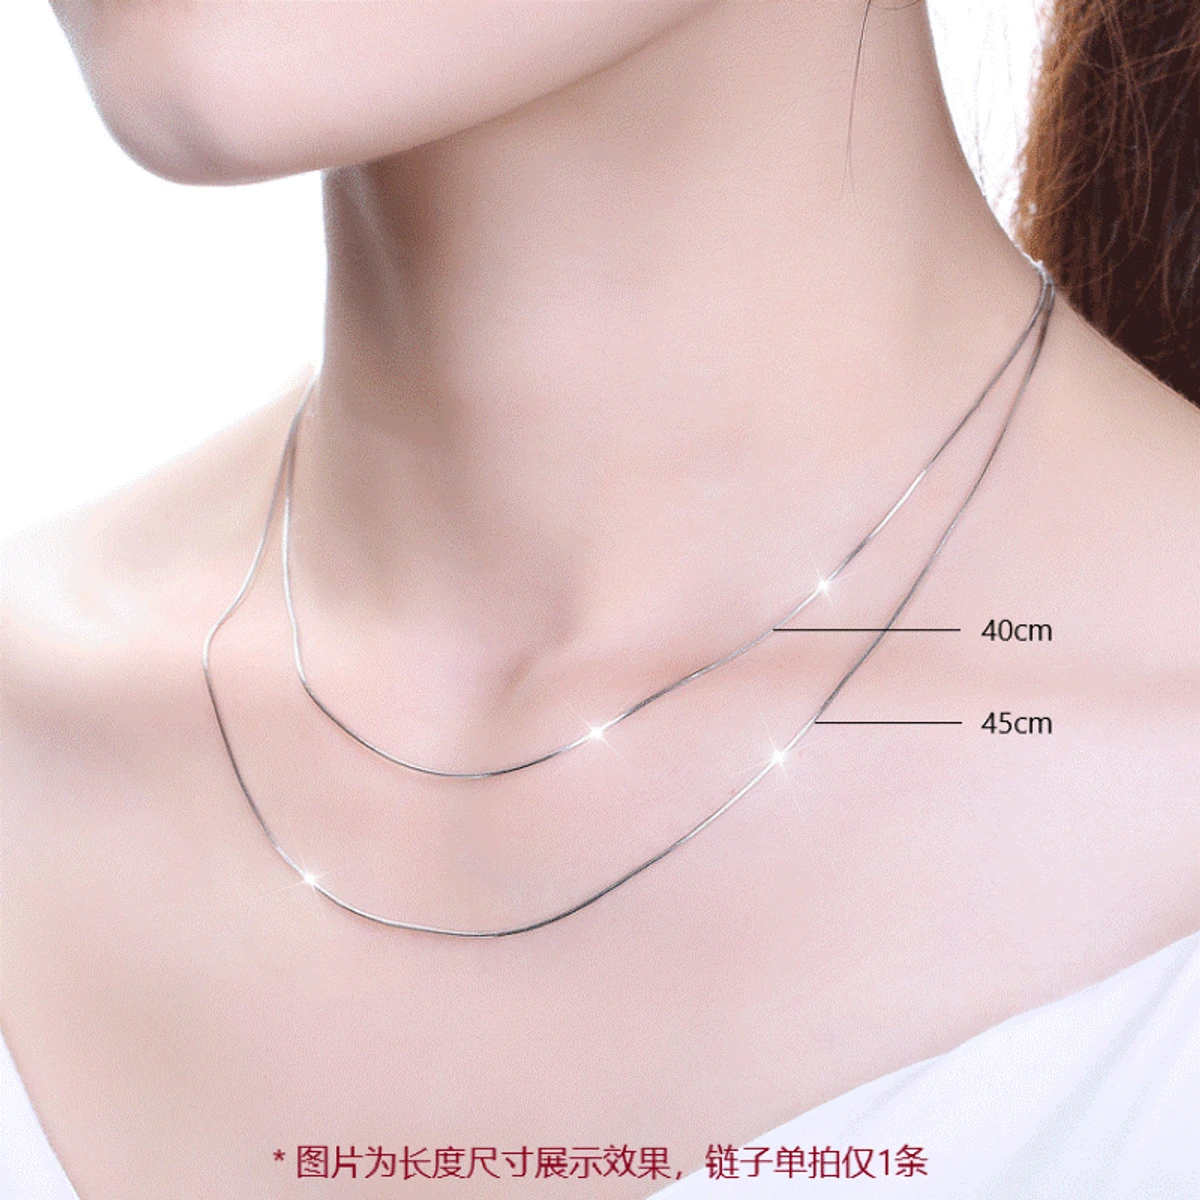 Trendy Fashion Snake Chain Necklaces for Women